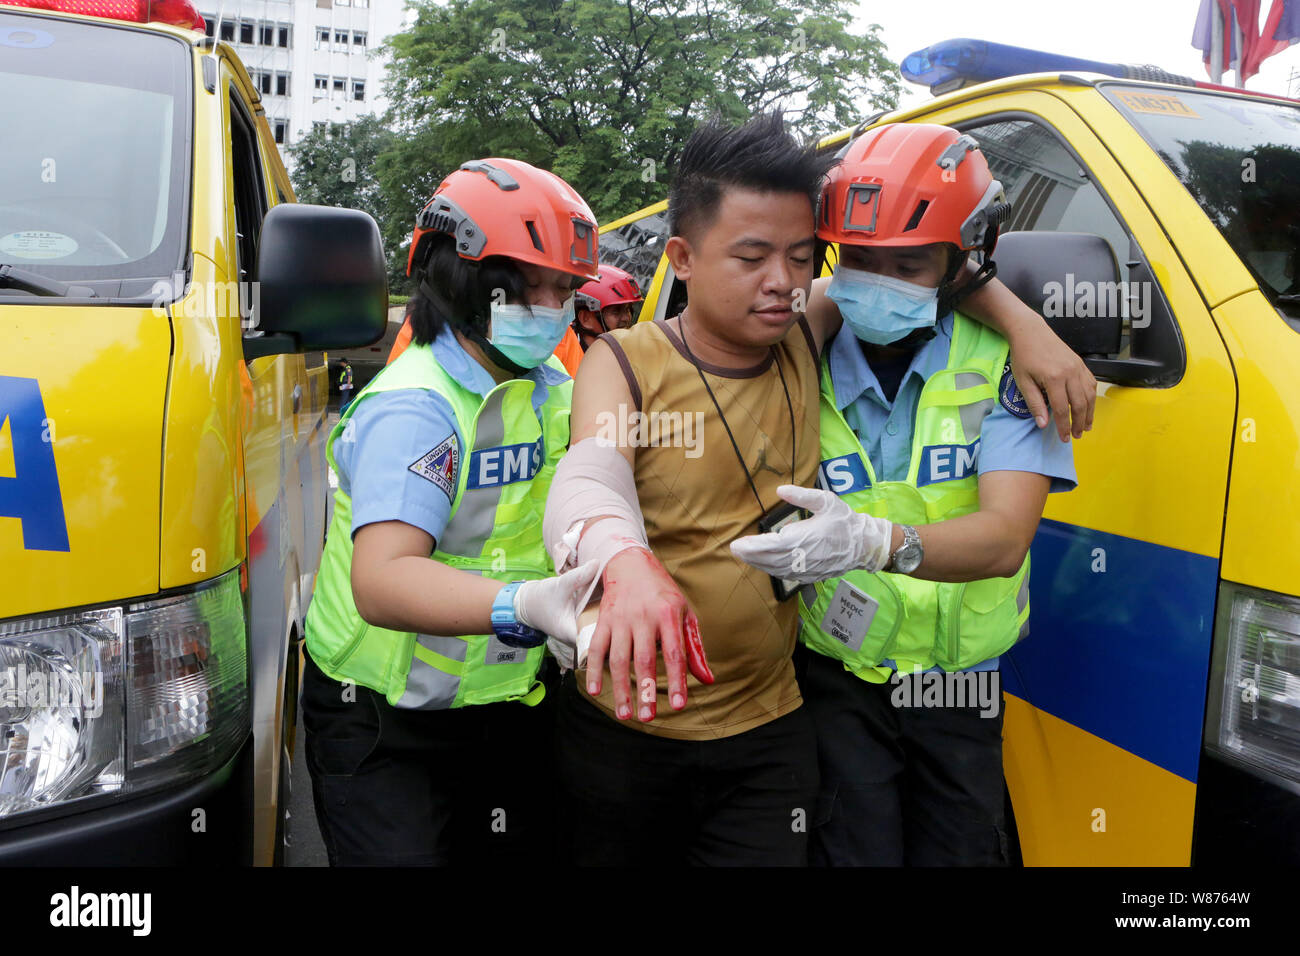 Quezon City, Philippines. 8th Aug, 2019. Rescuers help a mock victim during an earthquake drill in Quezon city, the Philippines, Aug. 8, 2019. The National Risk Reduction and Management Council on Thursday organized an earthquake drill to test the readiness of rescuers and the public in case of disasters. Credit: Rouelle Umali/Xinhua/Alamy Live News Stock Photo